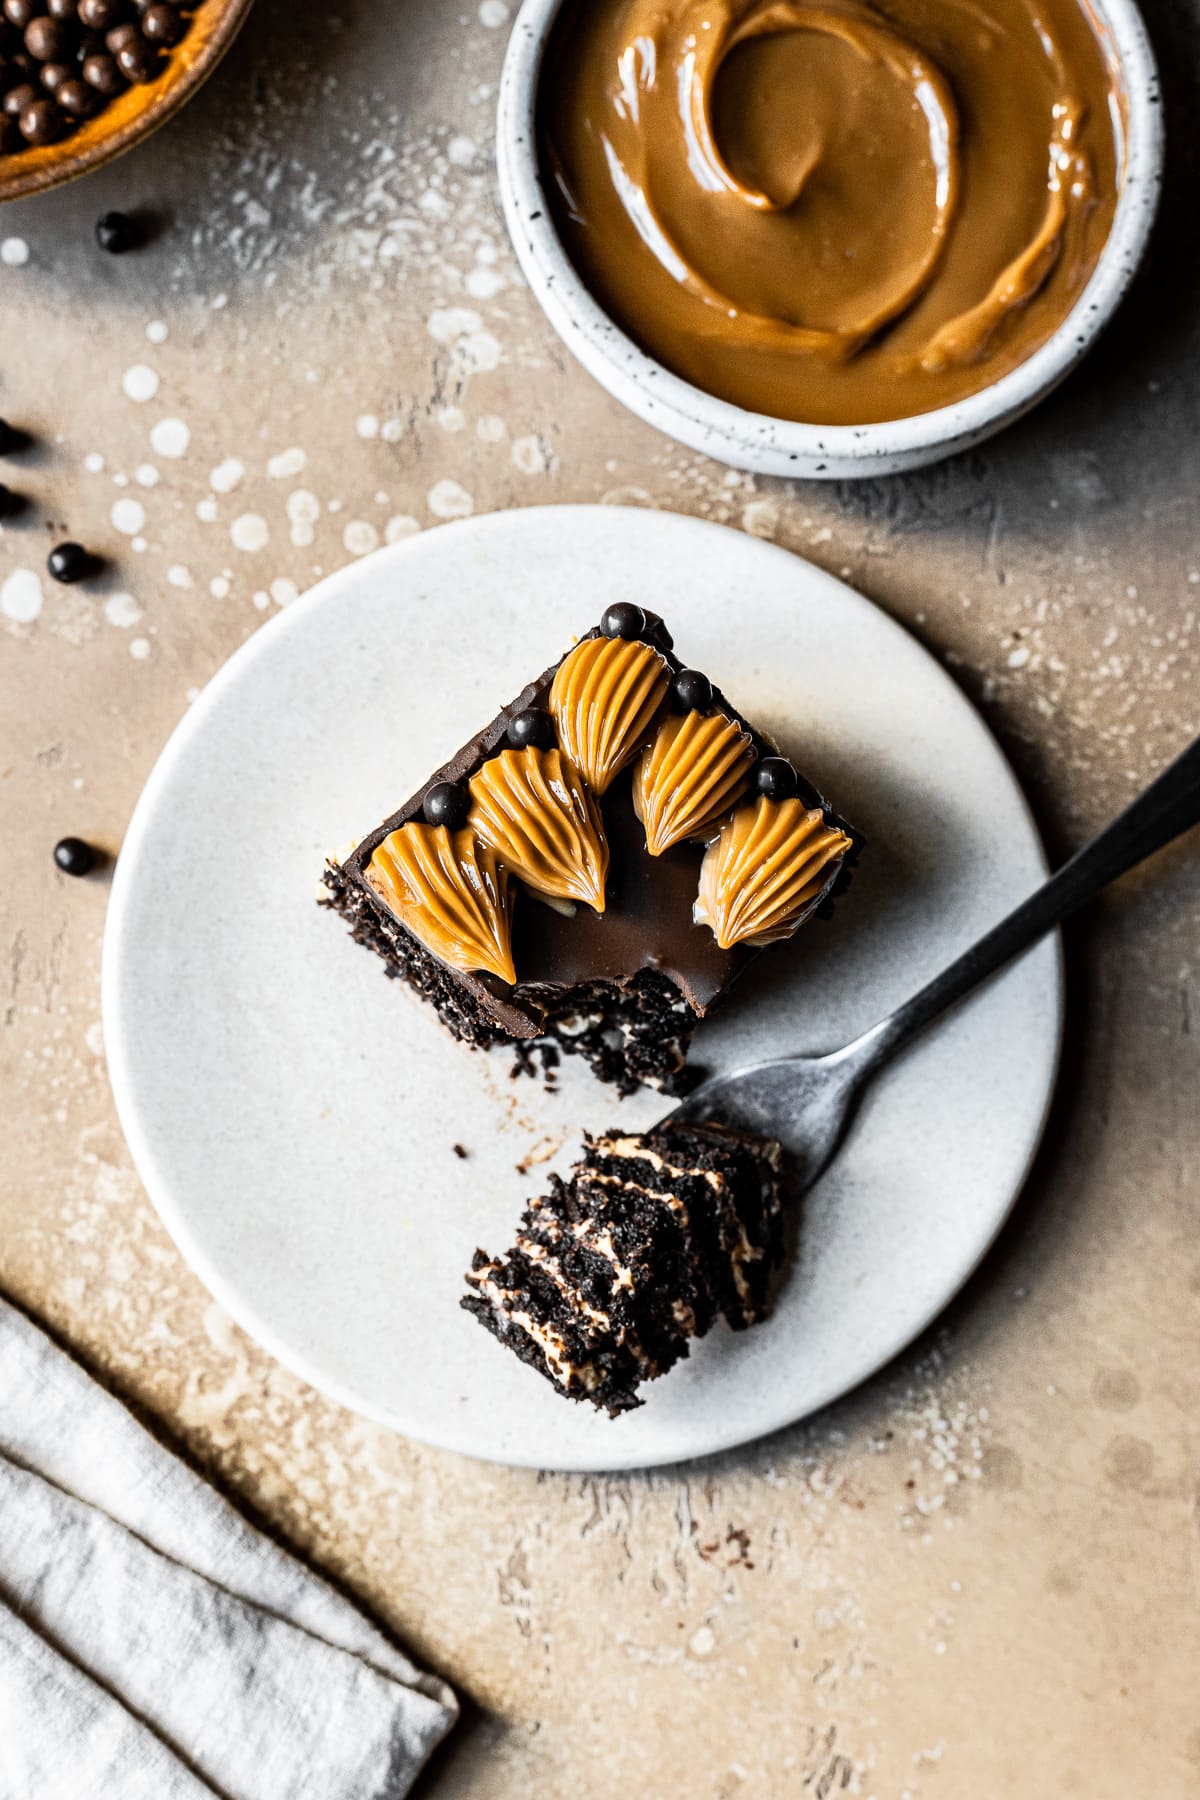 A square piece of chocolate dulce de leche icebox cake on a beige ceramic plate on a tan stone surface. There is a bit of cake resting on a fork on the plate. A small white ceramic bowl of dulce de leche is partially out of the frame at top right.